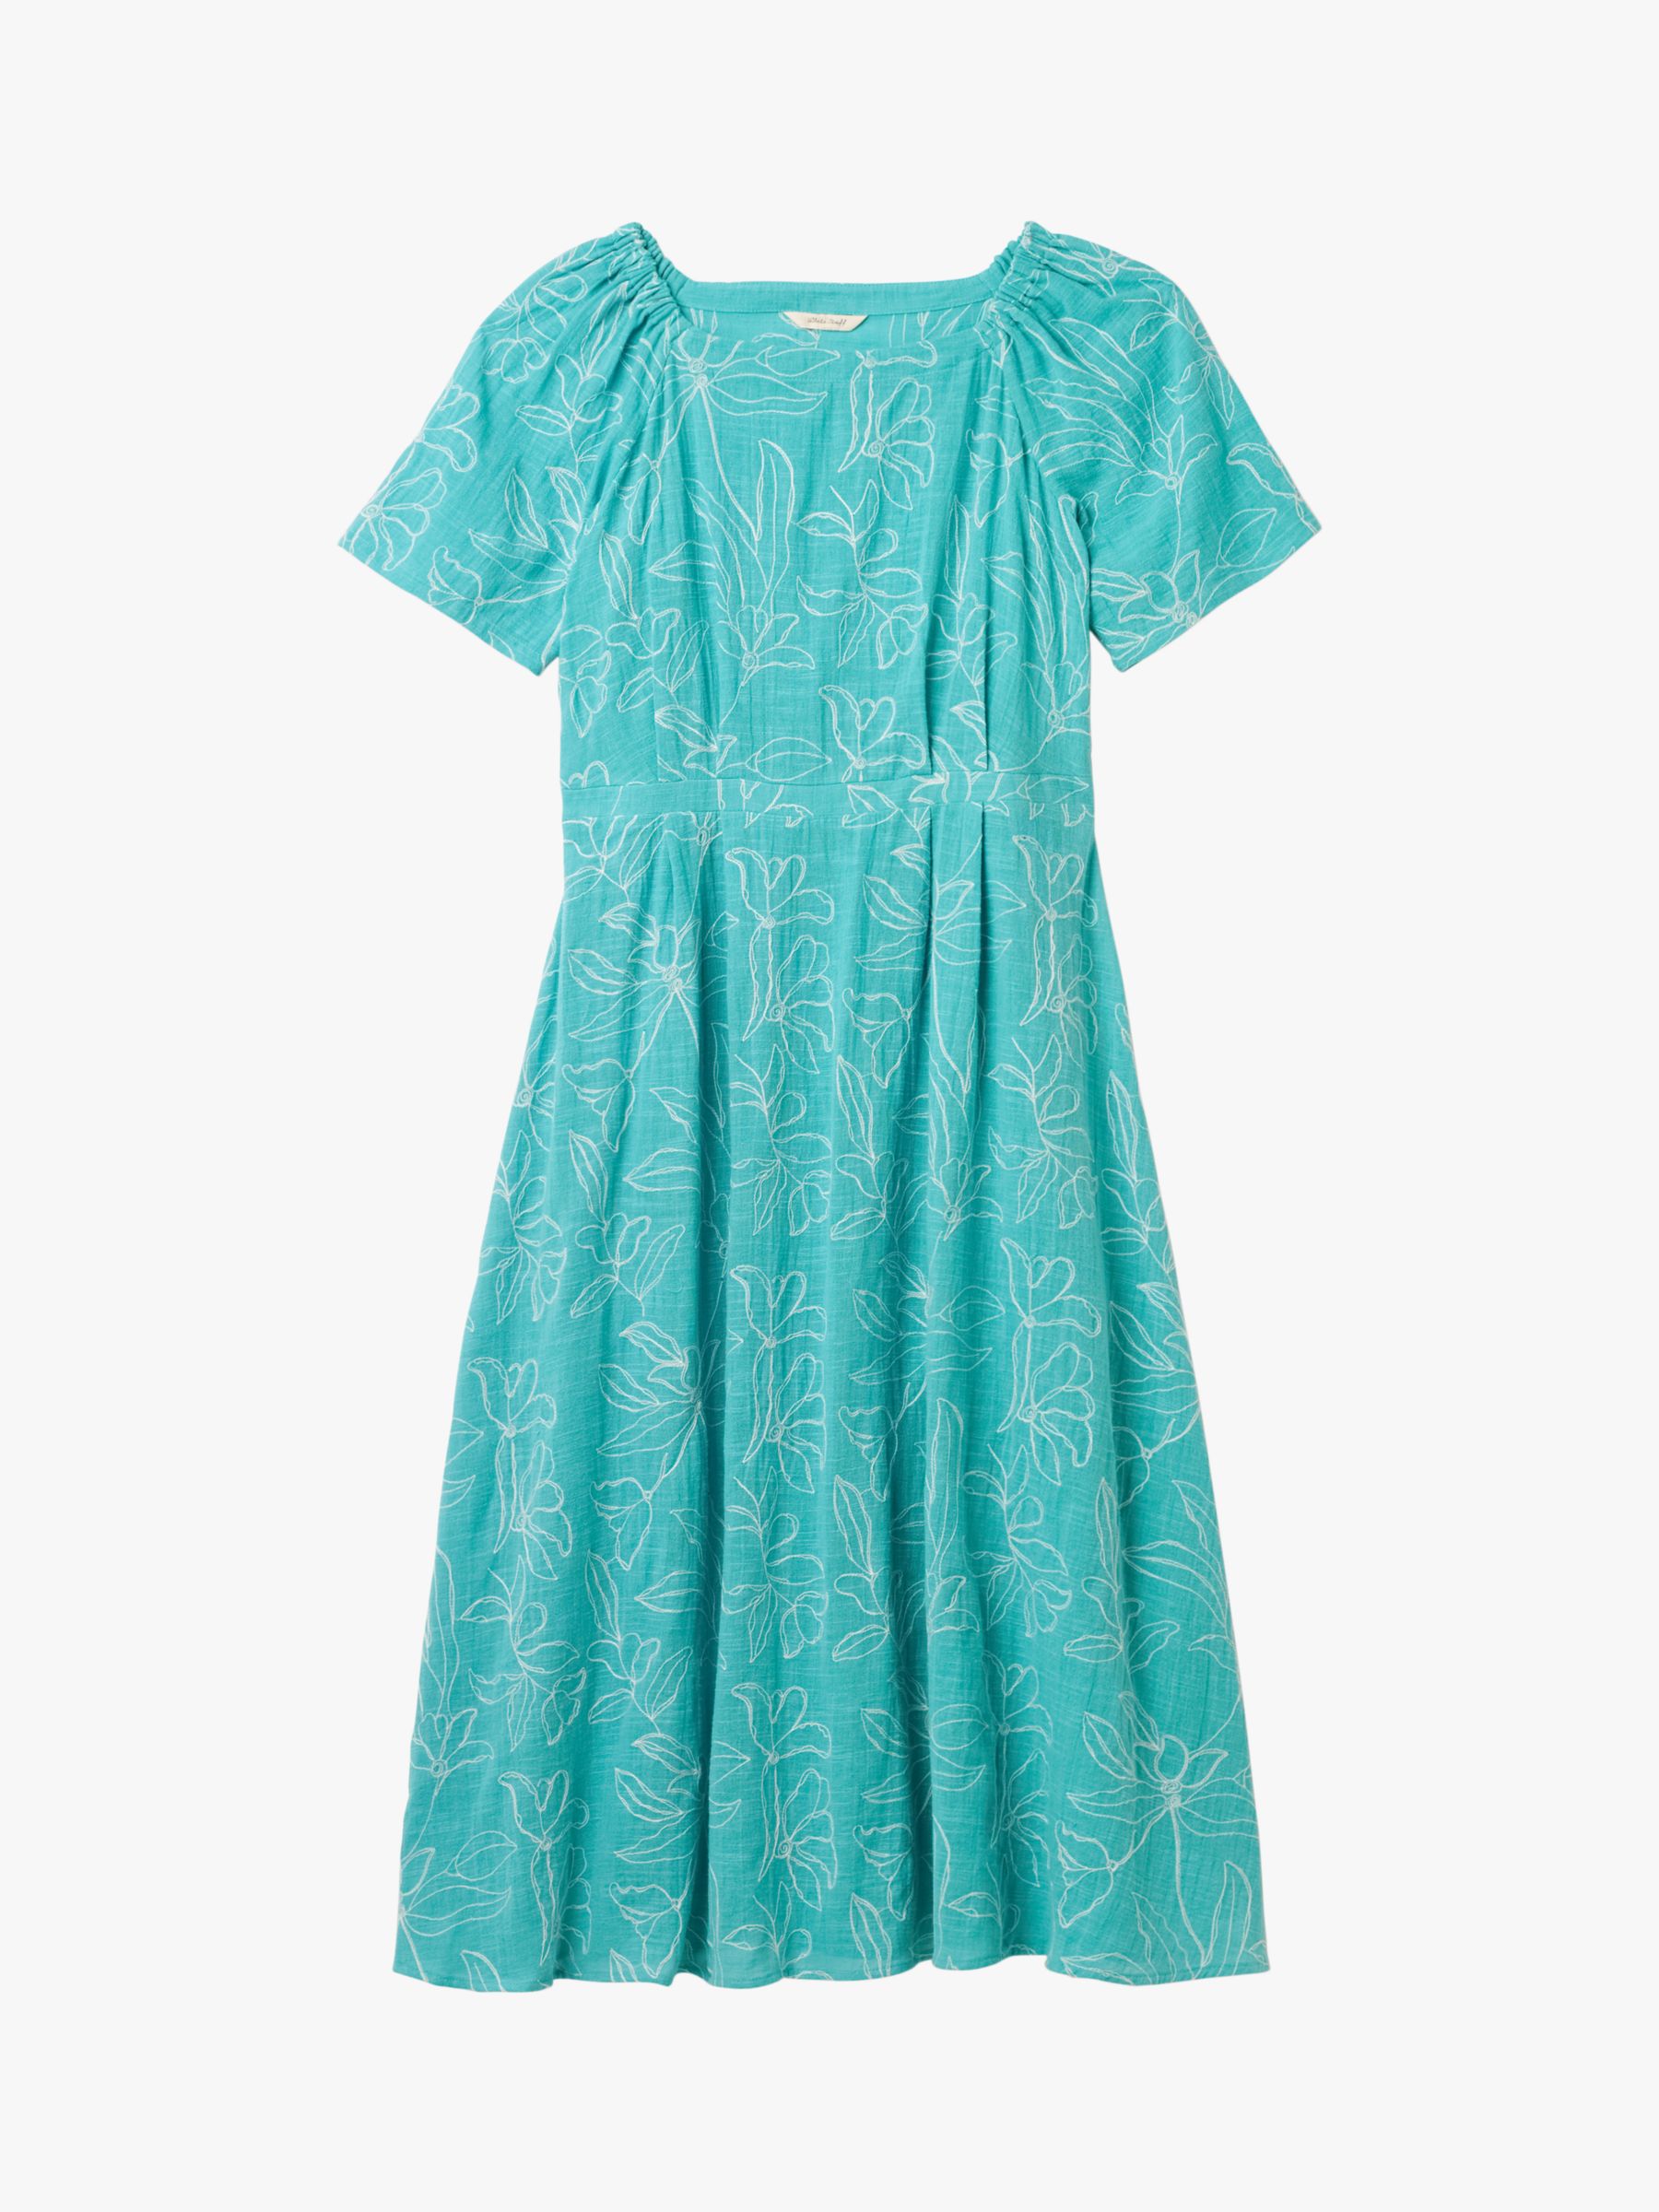 White Stuff Ebony Floral Embroidery Cotton Dress, Teal